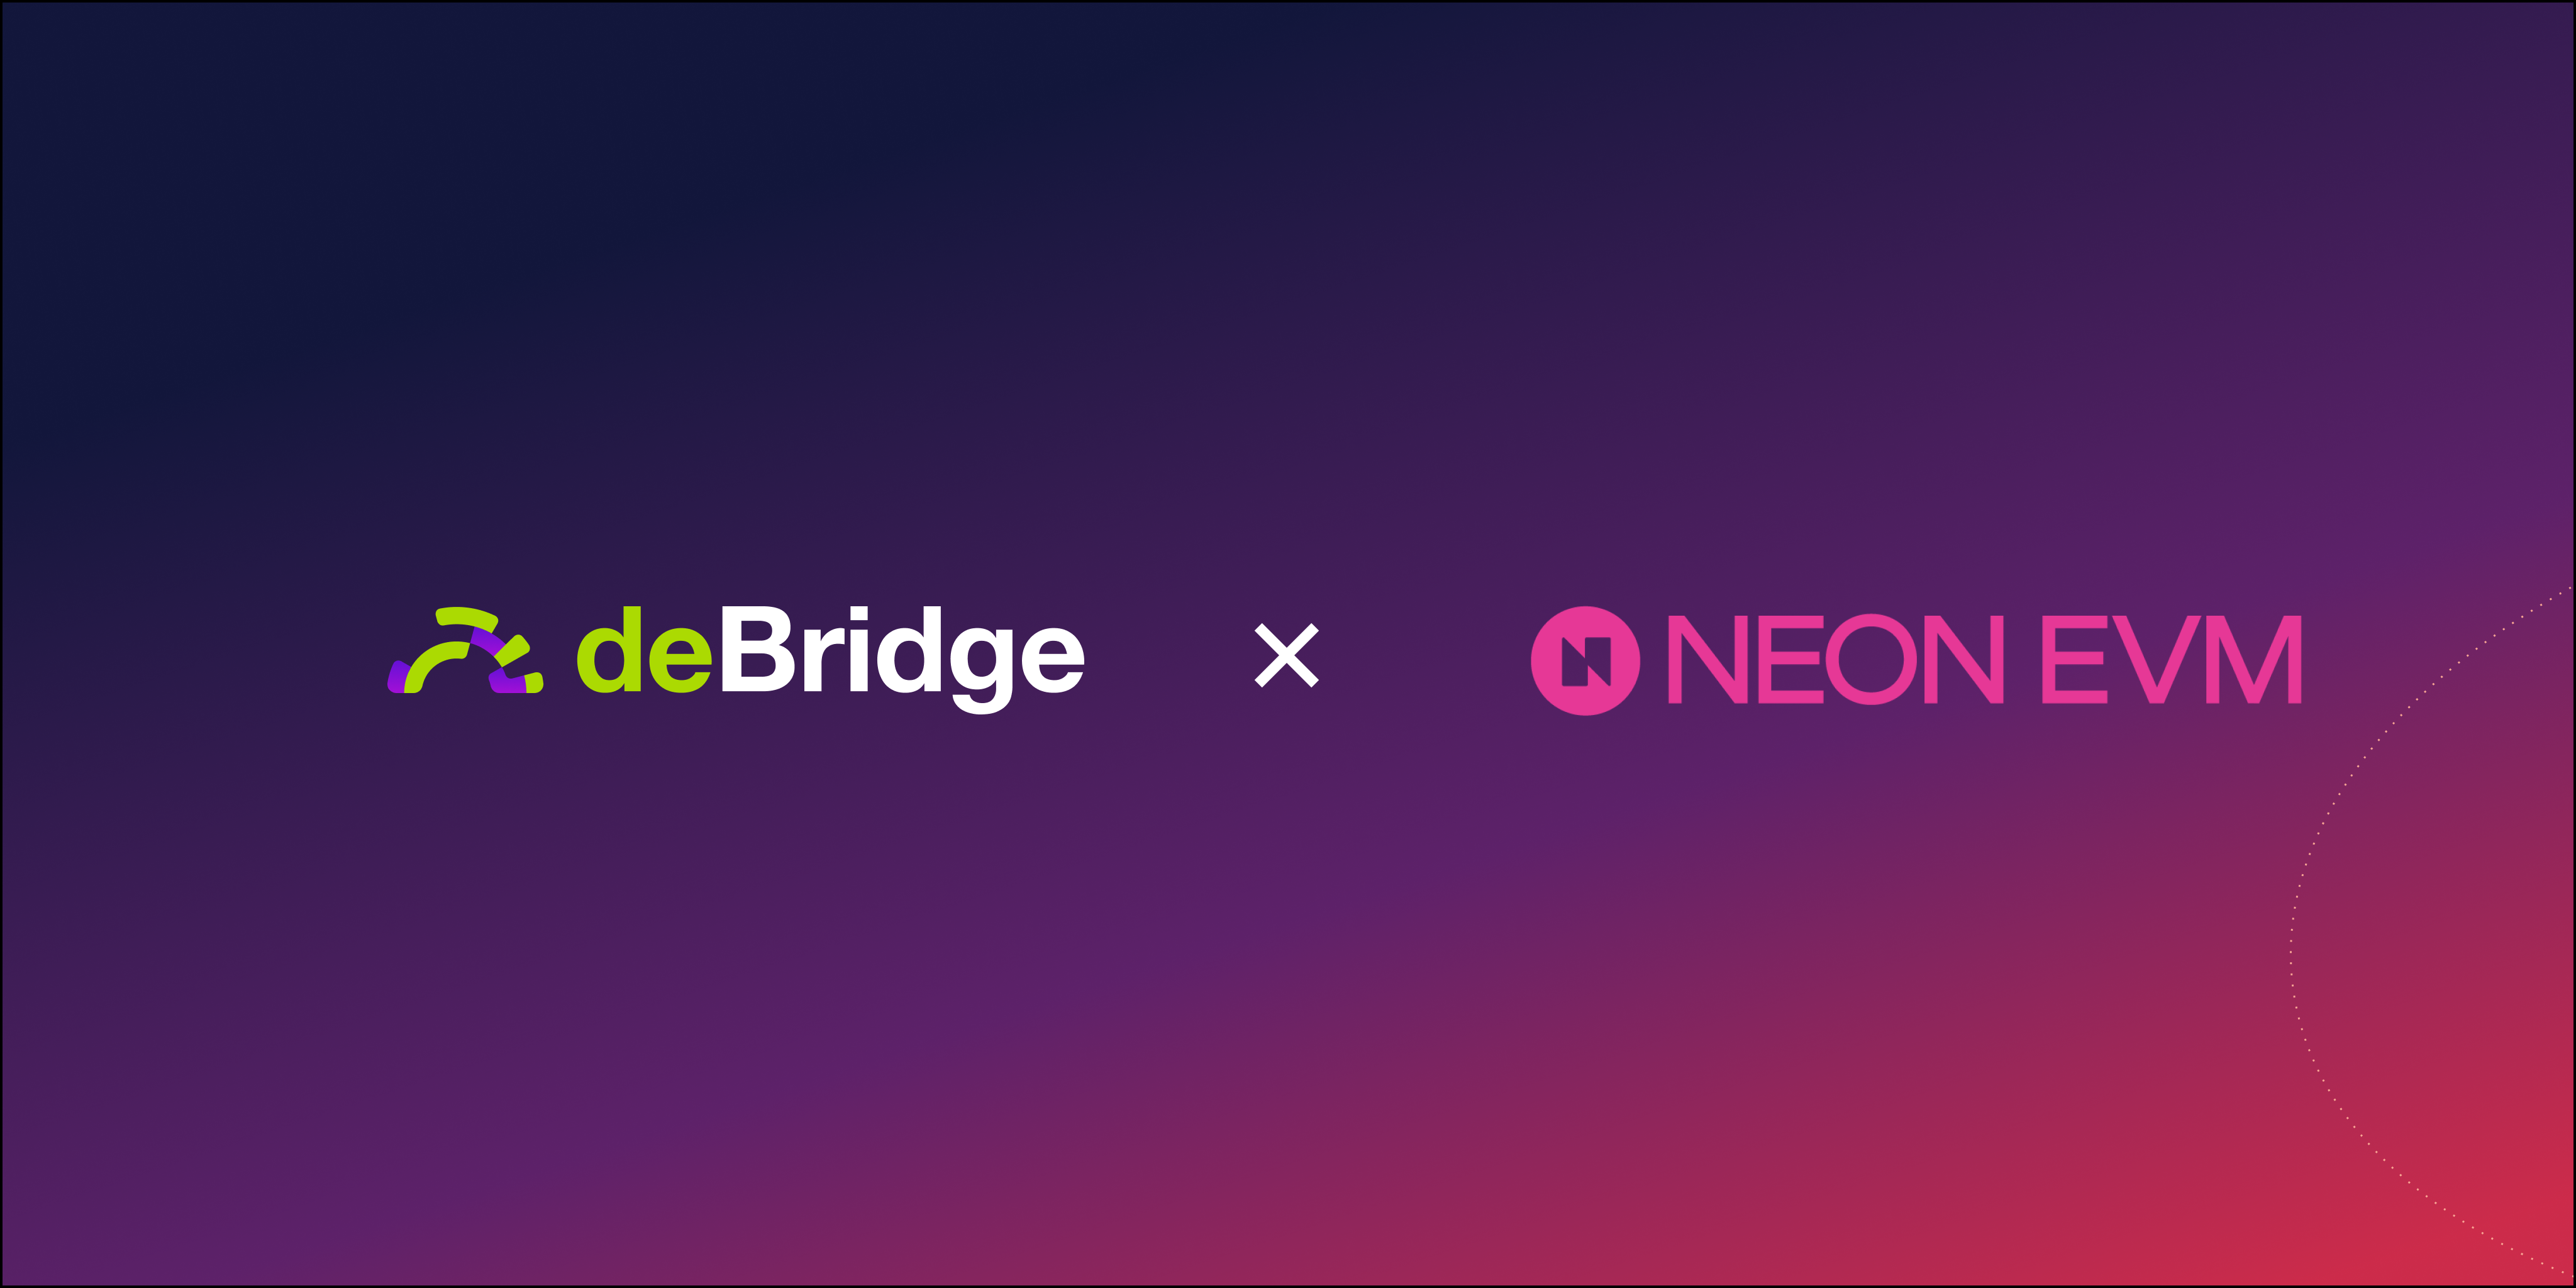 deBridge IaaS Launches Interoperability as a Service With Neon EVM As First Chain